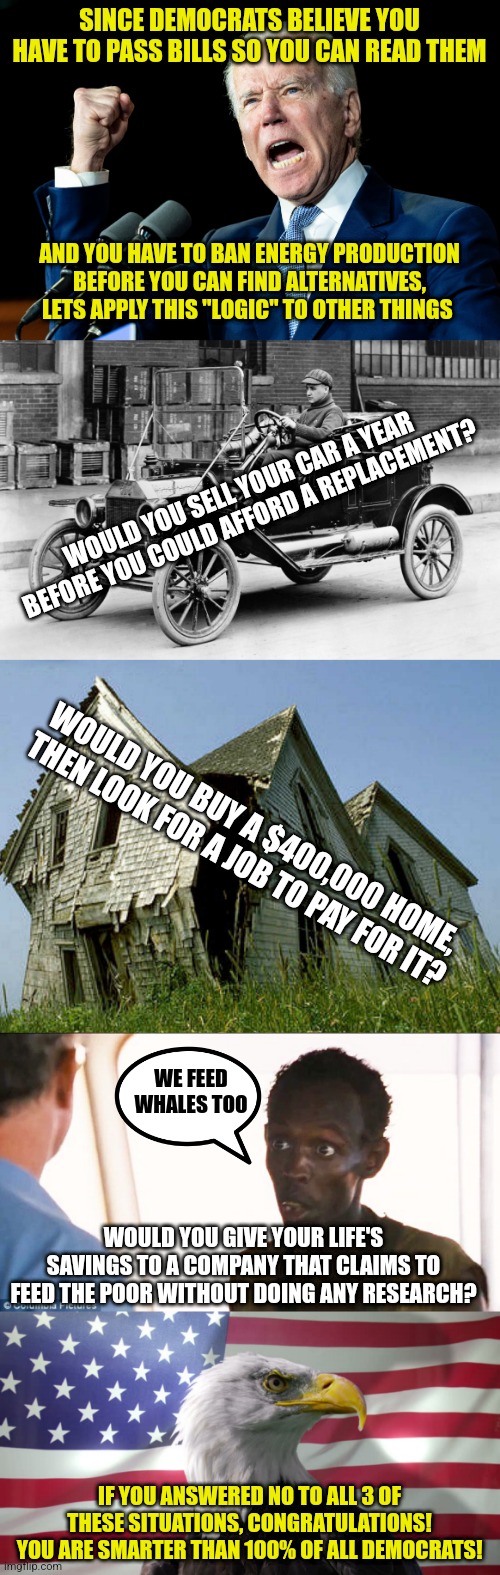 Democrat logic is amazingly similar to the rants of a homeless guy on a street corner..... |  SINCE DEMOCRATS BELIEVE YOU HAVE TO PASS BILLS SO YOU CAN READ THEM; AND YOU HAVE TO BAN ENERGY PRODUCTION BEFORE YOU CAN FIND ALTERNATIVES, LETS APPLY THIS "LOGIC" TO OTHER THINGS; WOULD YOU SELL YOUR CAR A YEAR BEFORE YOU COULD AFFORD A REPLACEMENT? WOULD YOU BUY A $400,000 HOME, THEN LOOK FOR A JOB TO PAY FOR IT? WE FEED WHALES TOO; WOULD YOU GIVE YOUR LIFE'S SAVINGS TO A COMPANY THAT CLAIMS TO FEED THE POOR WITHOUT DOING ANY RESEARCH? IF YOU ANSWERED NO TO ALL 3 OF THESE SITUATIONS, CONGRATULATIONS! YOU ARE SMARTER THAN 100% OF ALL DEMOCRATS! | image tagged in joe biden - nap times for everyone,model t,somali pirate,bald eagle with american flag,democrats,liberal logic | made w/ Imgflip meme maker